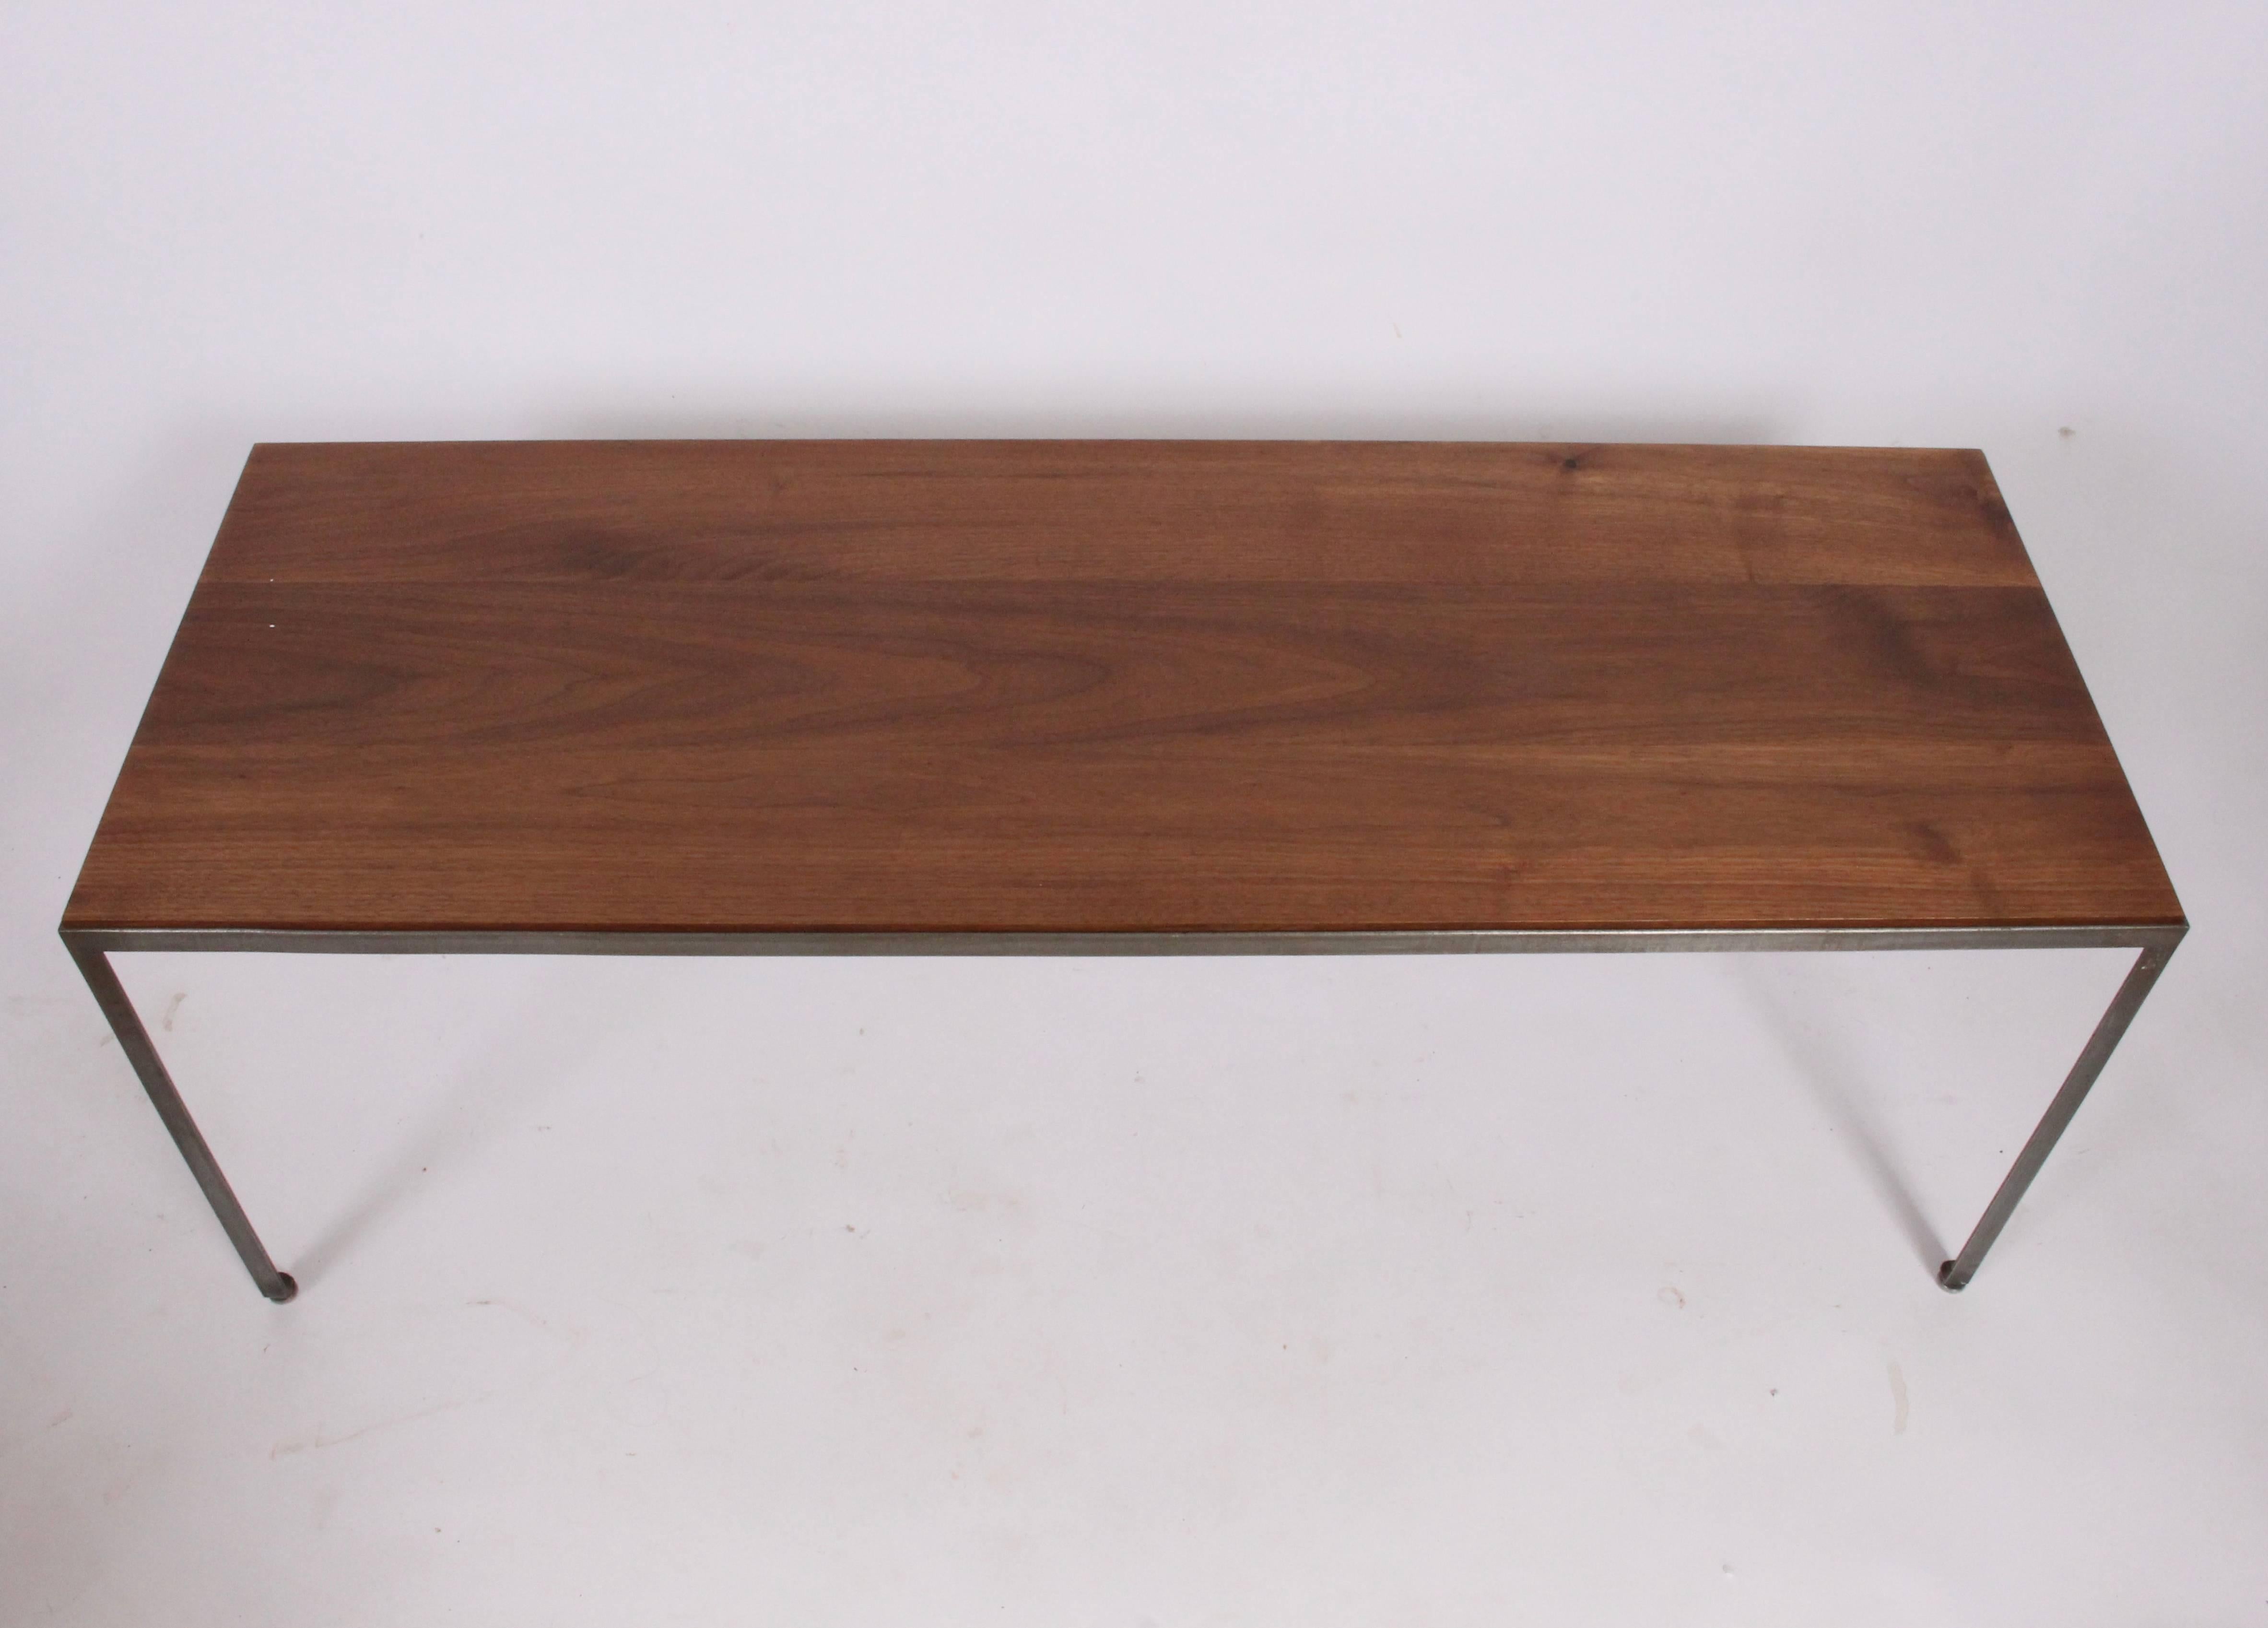 Vintage George Nelson for Herman Miller 5150 Coffee Table, Bedroom Bench. Rectangular Steel framework with Black Walnut tabletop. Versatile. With paint removed and custom solid Black Walnut top.